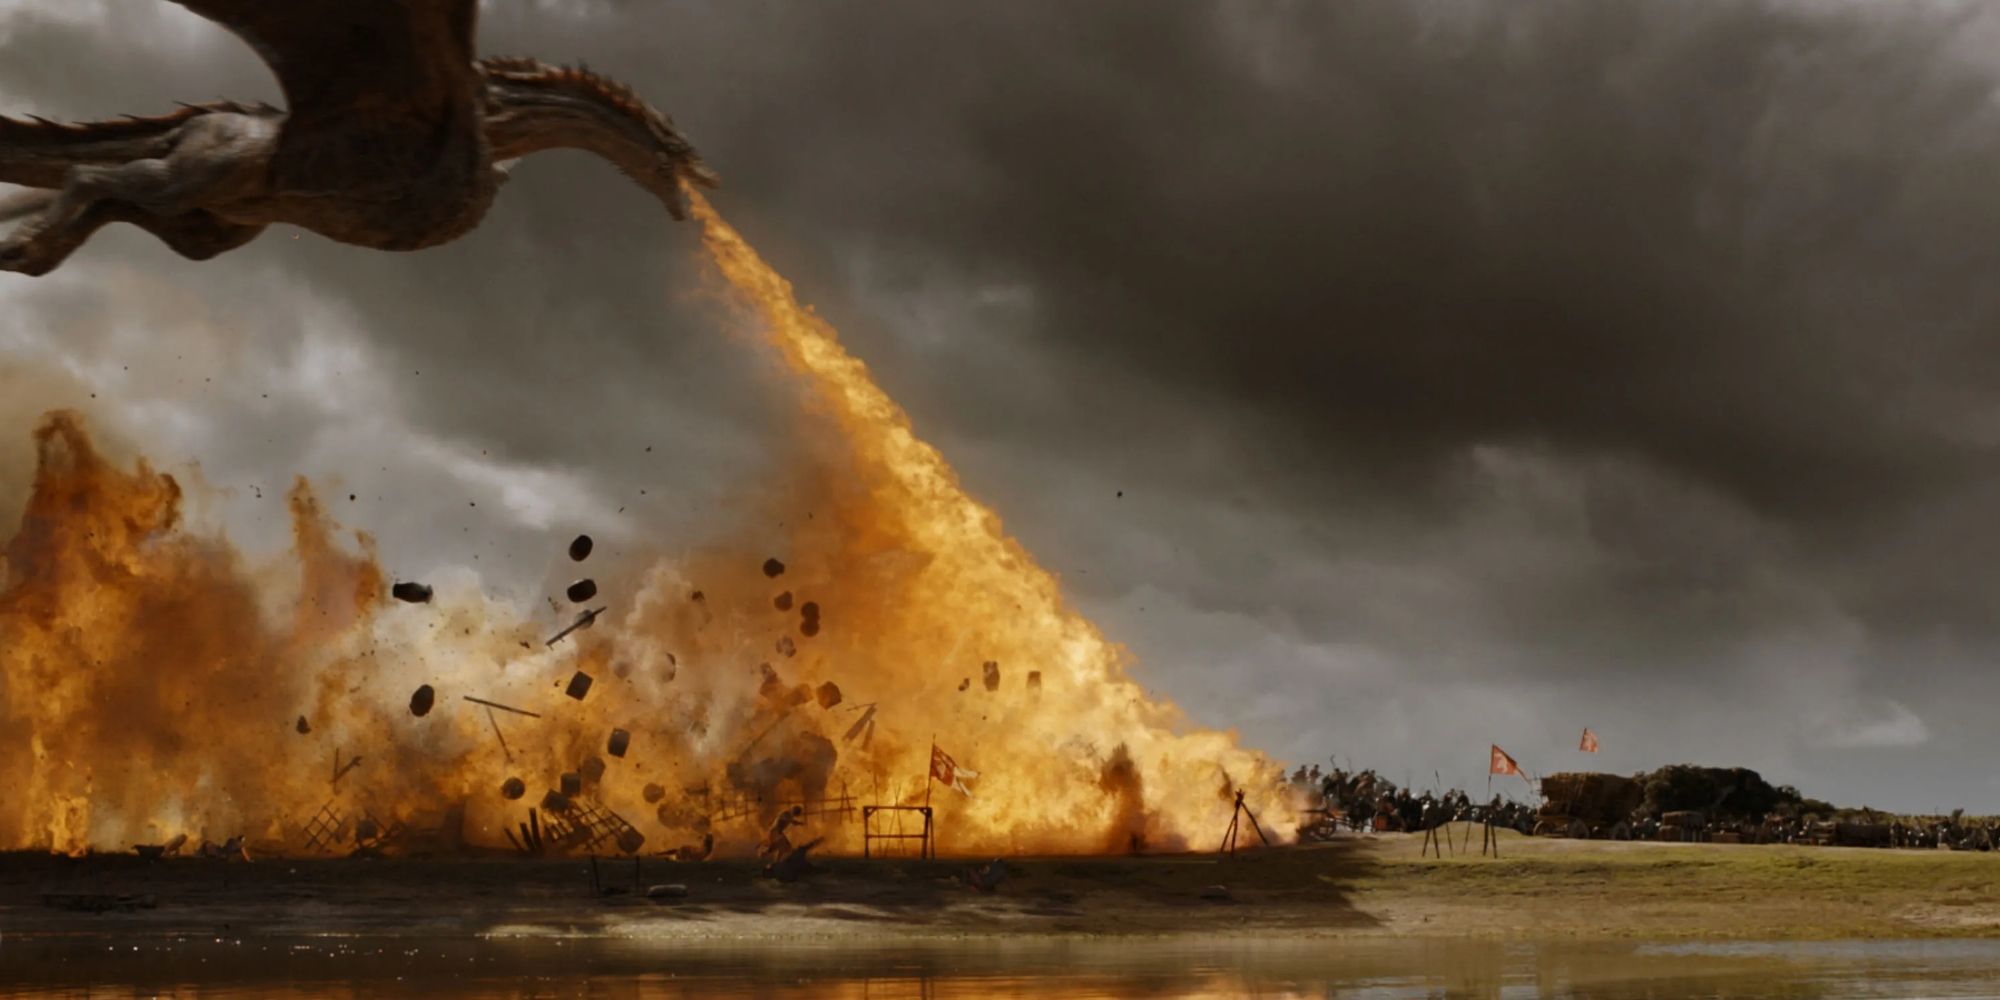 A dragon breathing fire in season 7 of 'Game of Thrones'